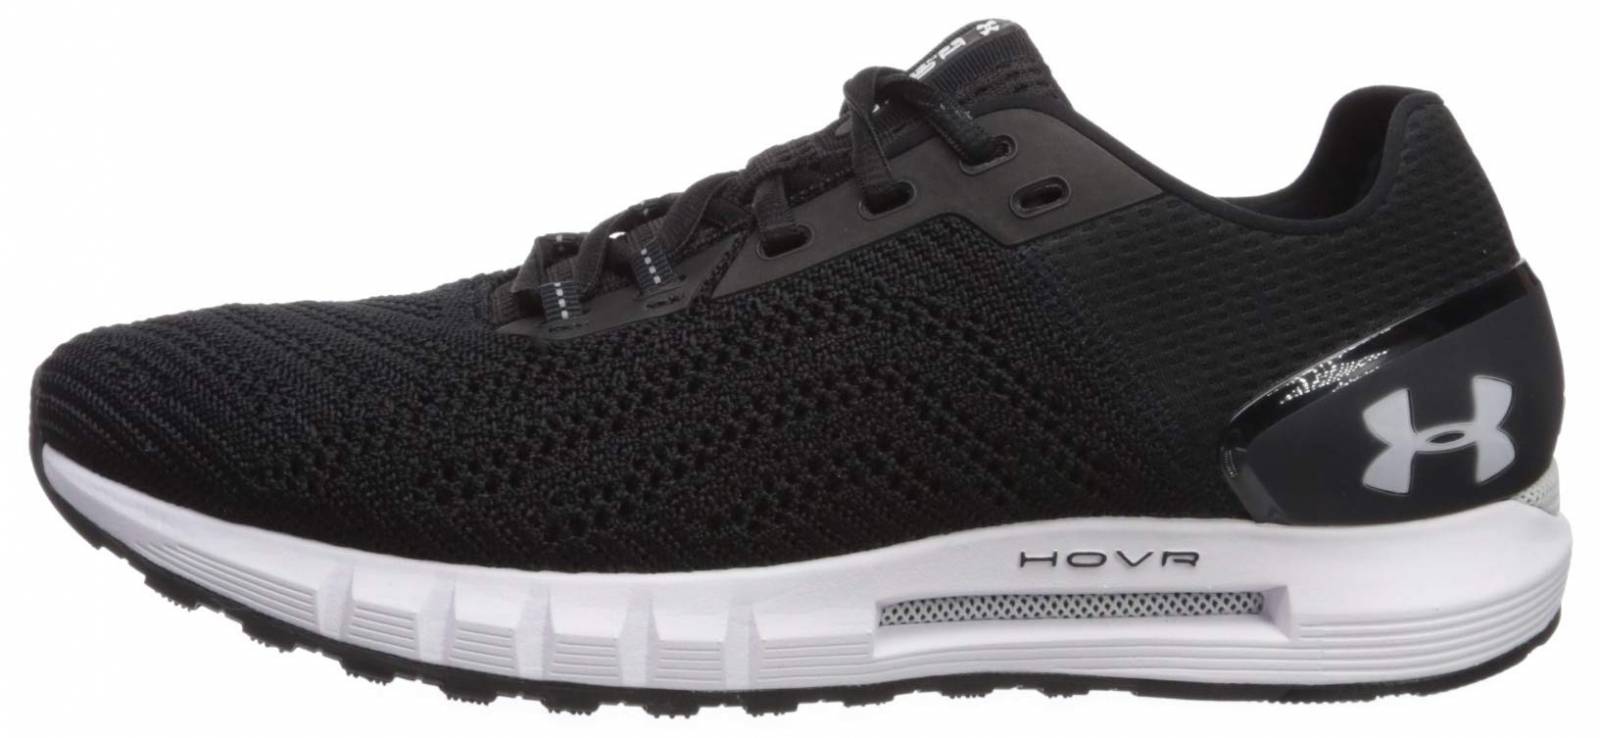 MENS UNDER ARMOUR HOVR SONIC 2 RUNNING TRAINING SHOES ALL SIZES 